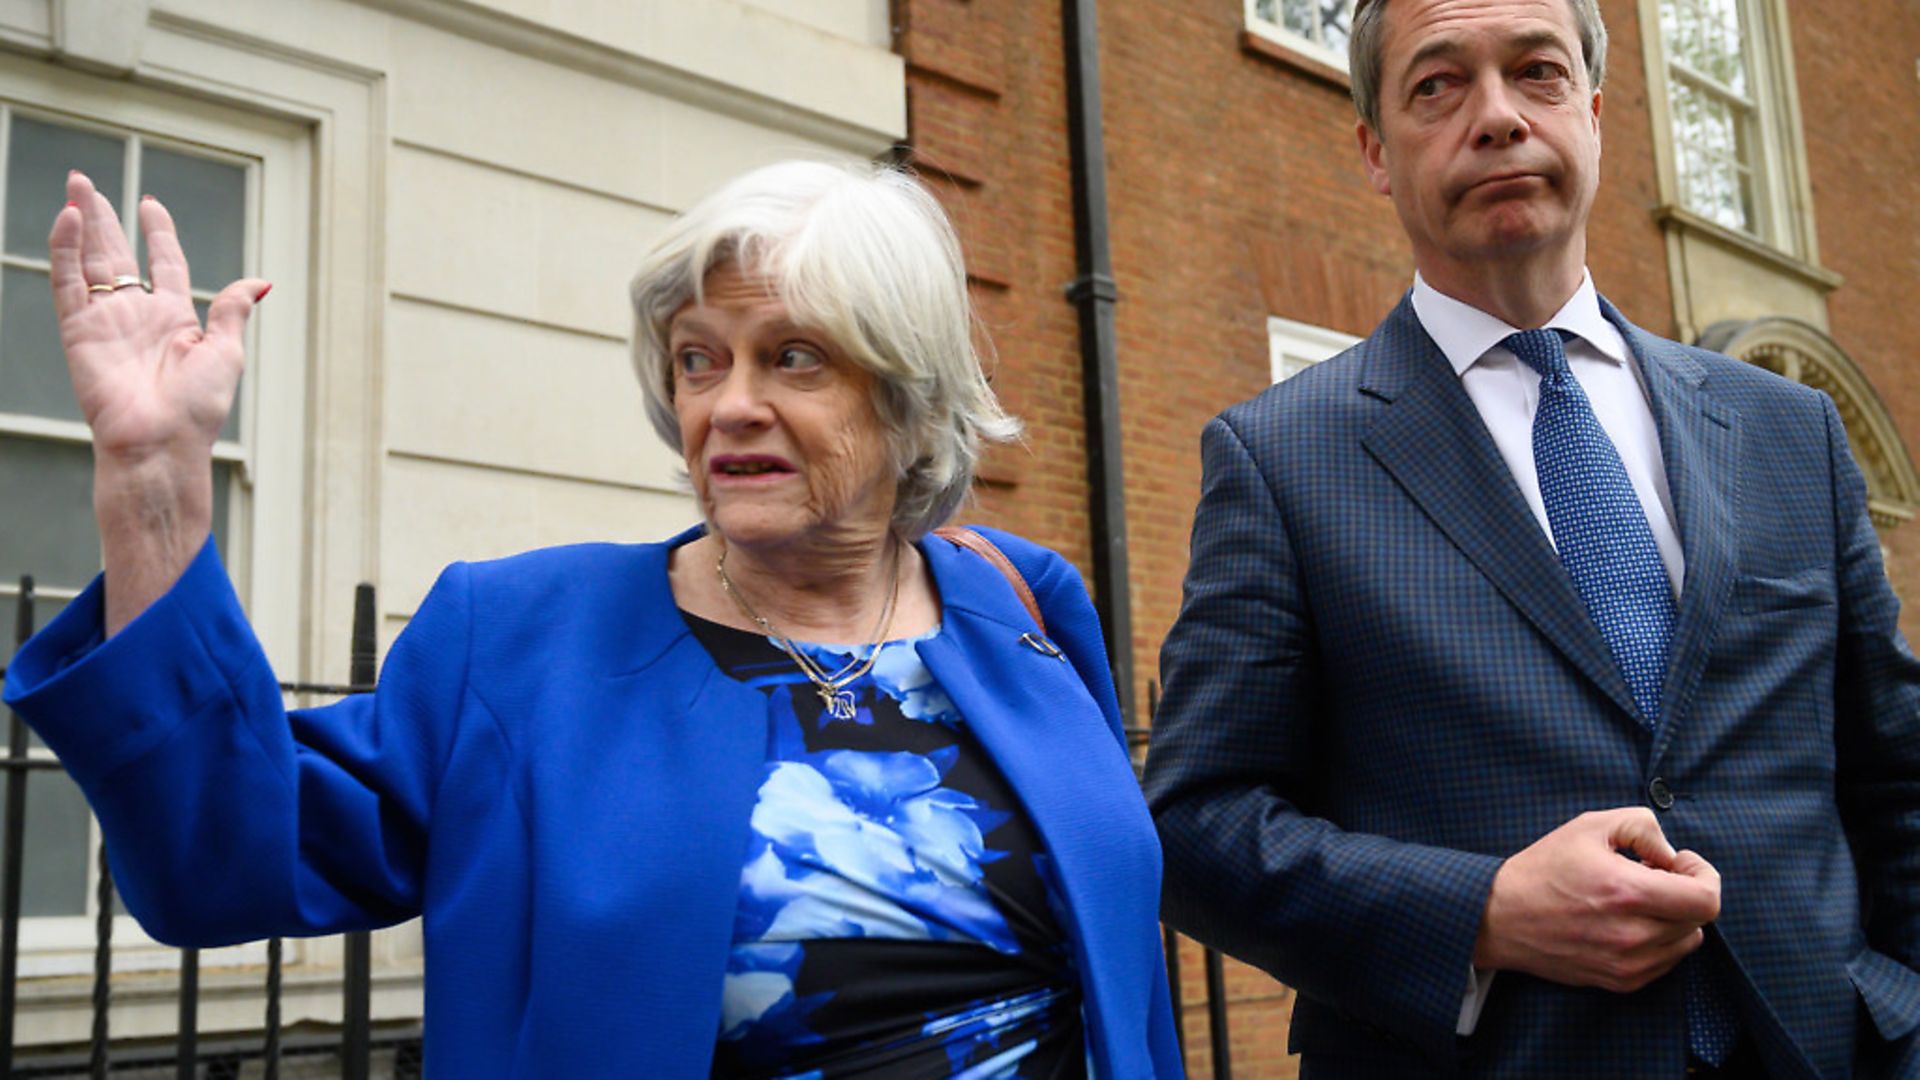 Ann Widdecombe Defects From The Conservative Party To Nigel Farage's Brexit Party. Photo by Leon Neal/Getty Images - Credit: Getty Images